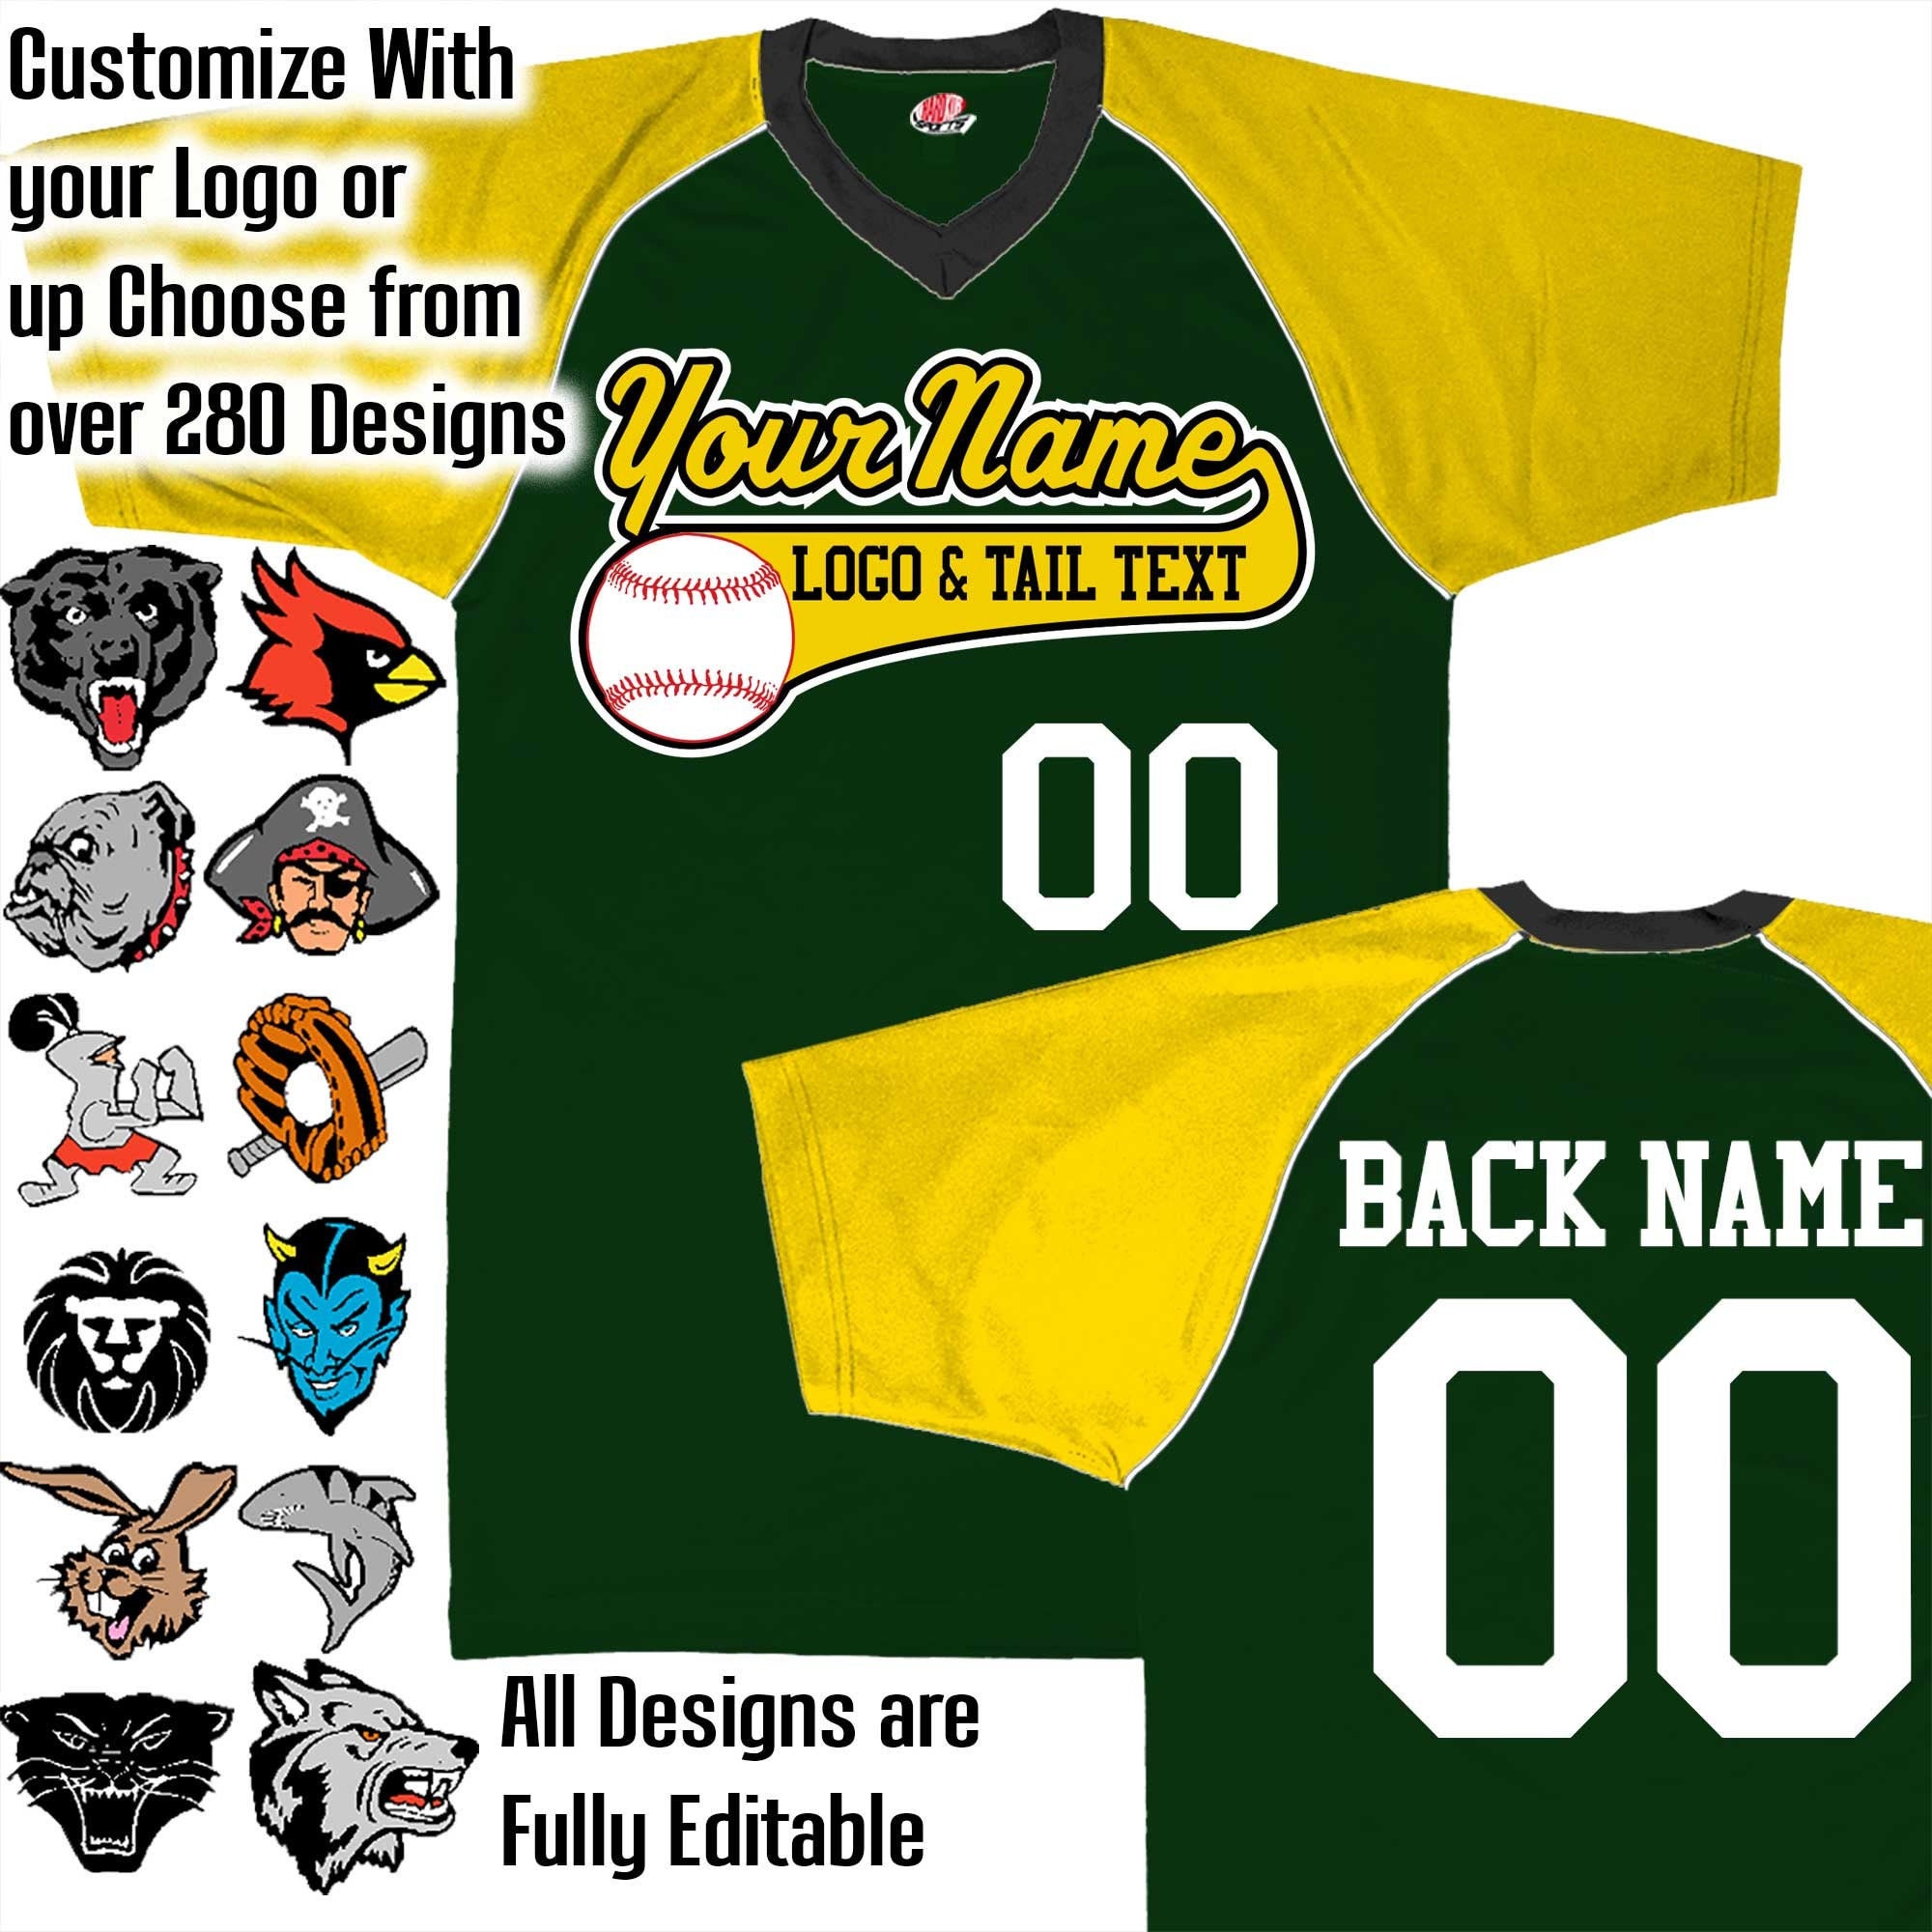 Dark Green, Gold & White Customized Baseball Jersey With Your Team, Player Name Numbers Custom Logo